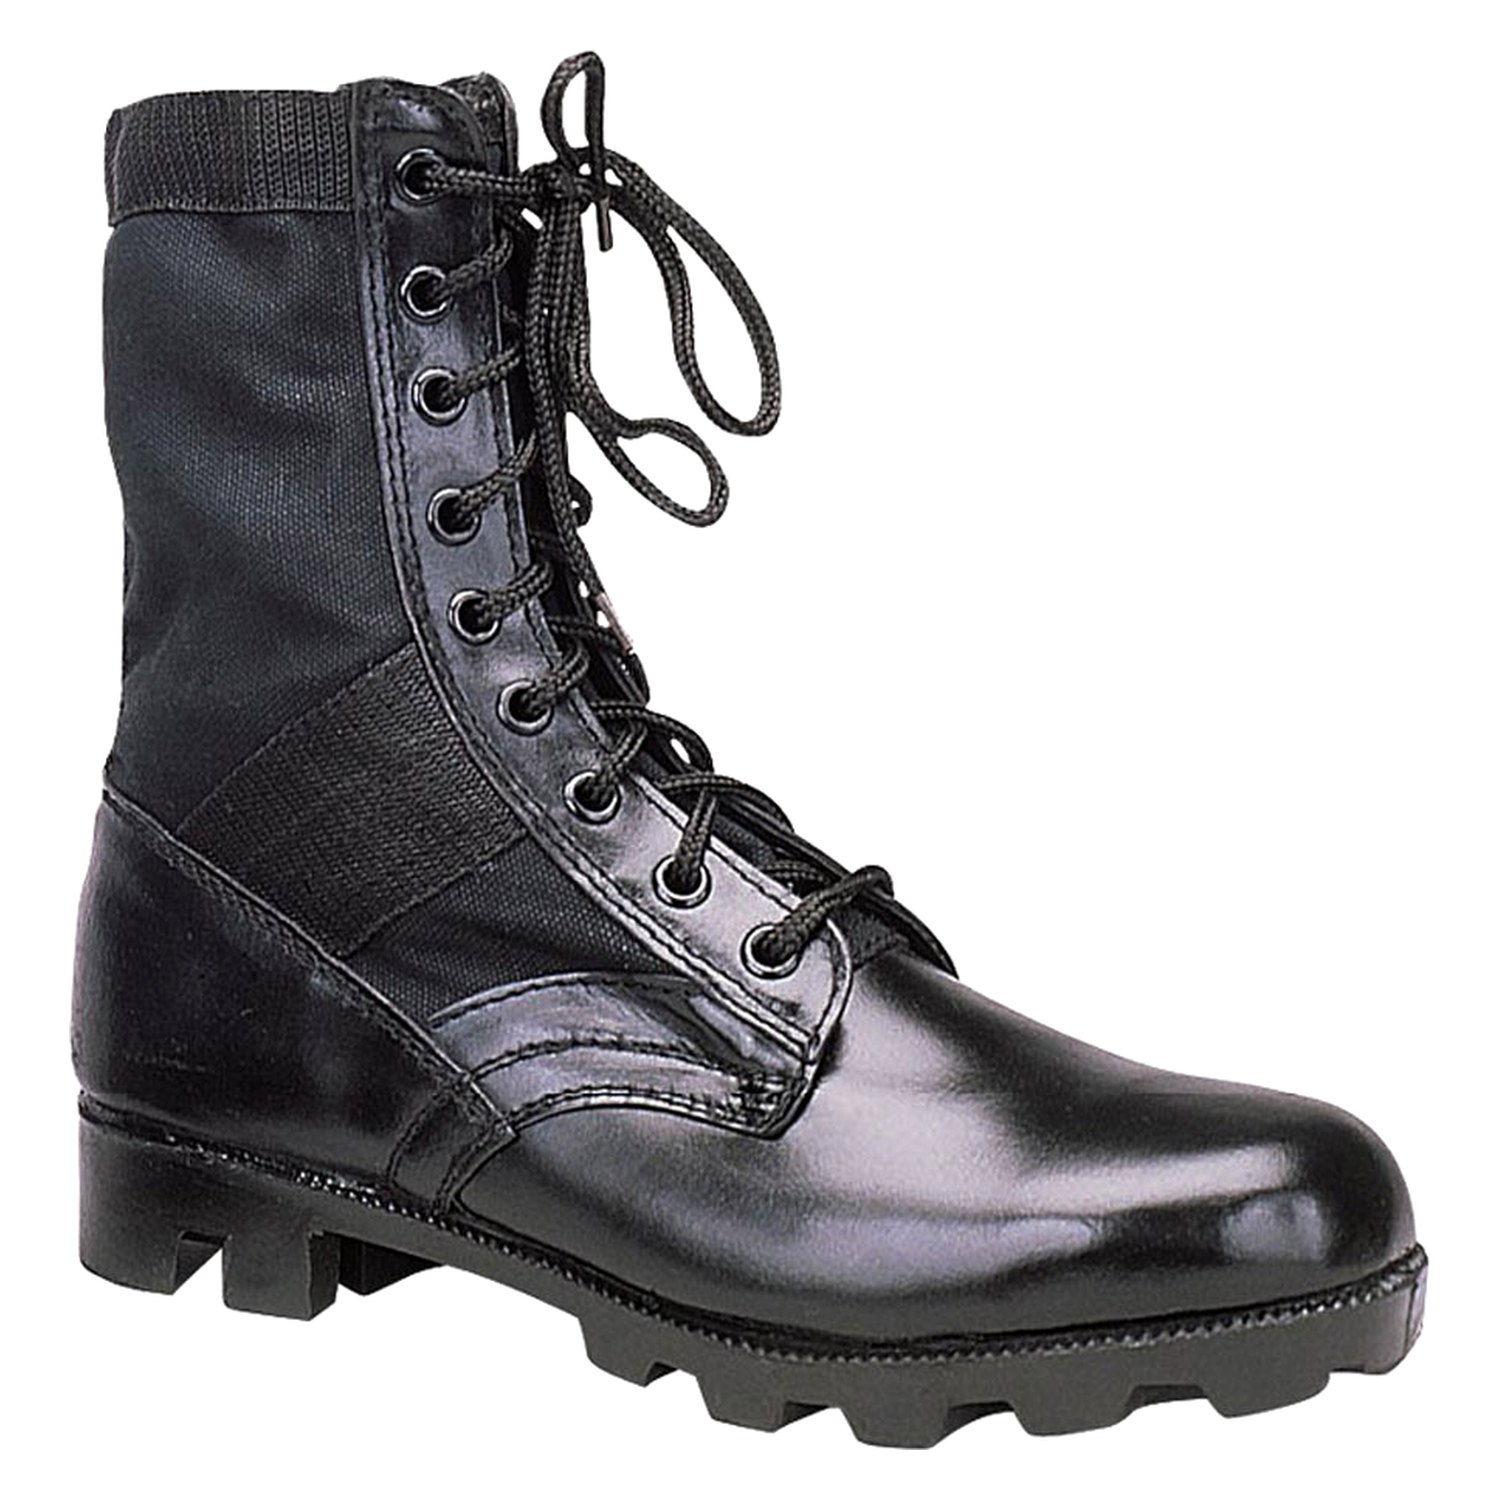 Rothco® 5081Black9Wide Classic Military Jungle Boots